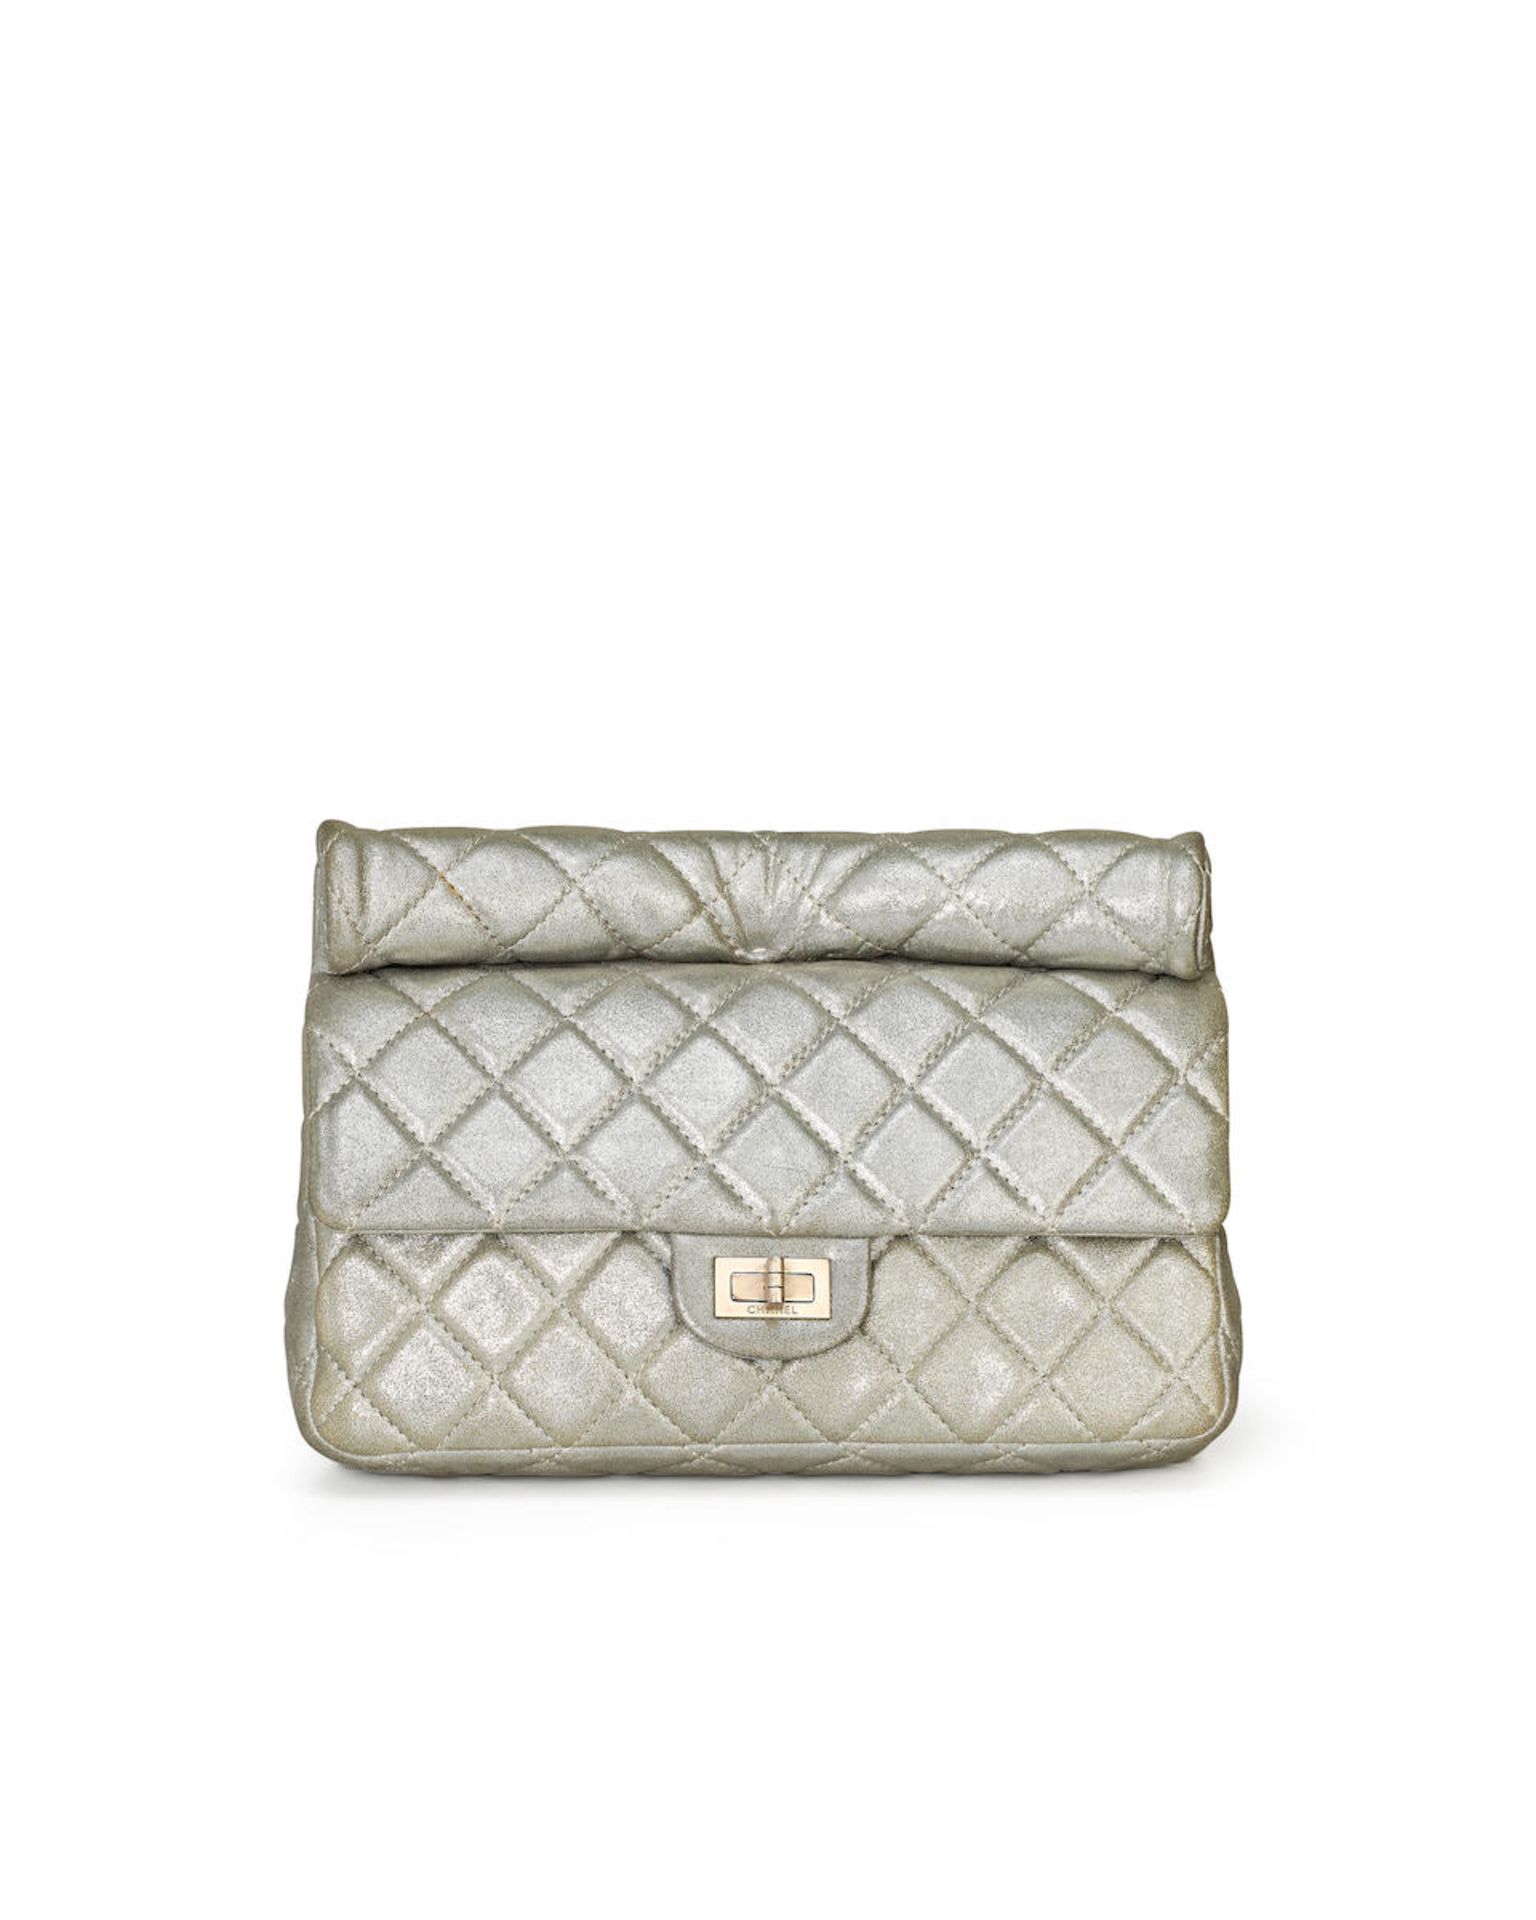 CHANEL: METALLIC SILVER QUILTED CALFSKIN 2.55 CLUTCH WITH BRUSHED SILVER HARDWARE (Include origi...